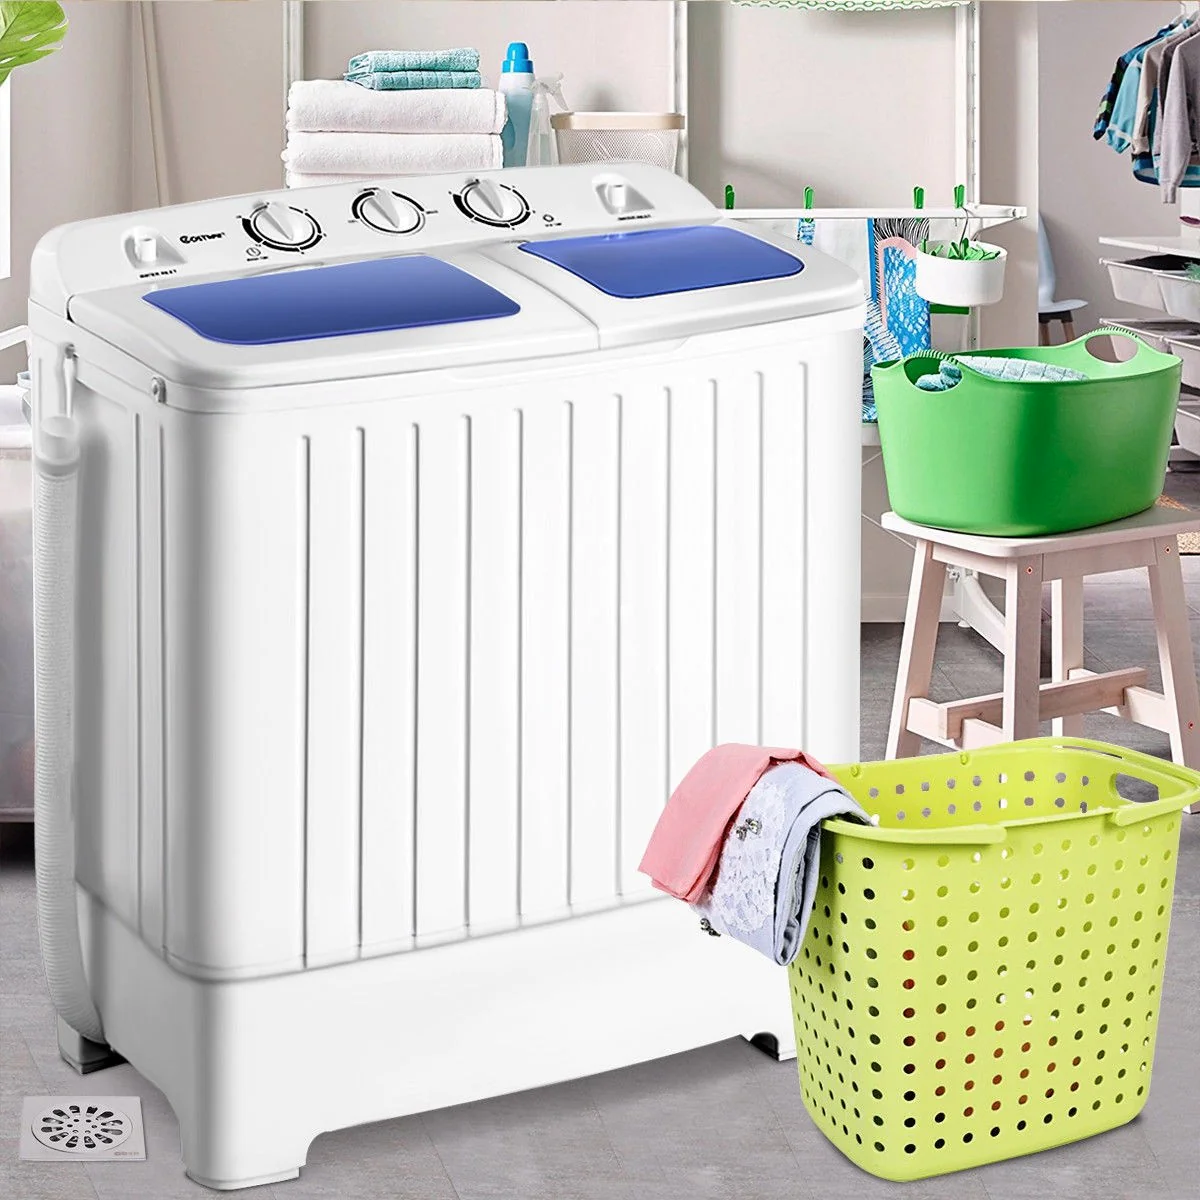 FAQs and Troubleshooting for the Blue + White Washing Machine